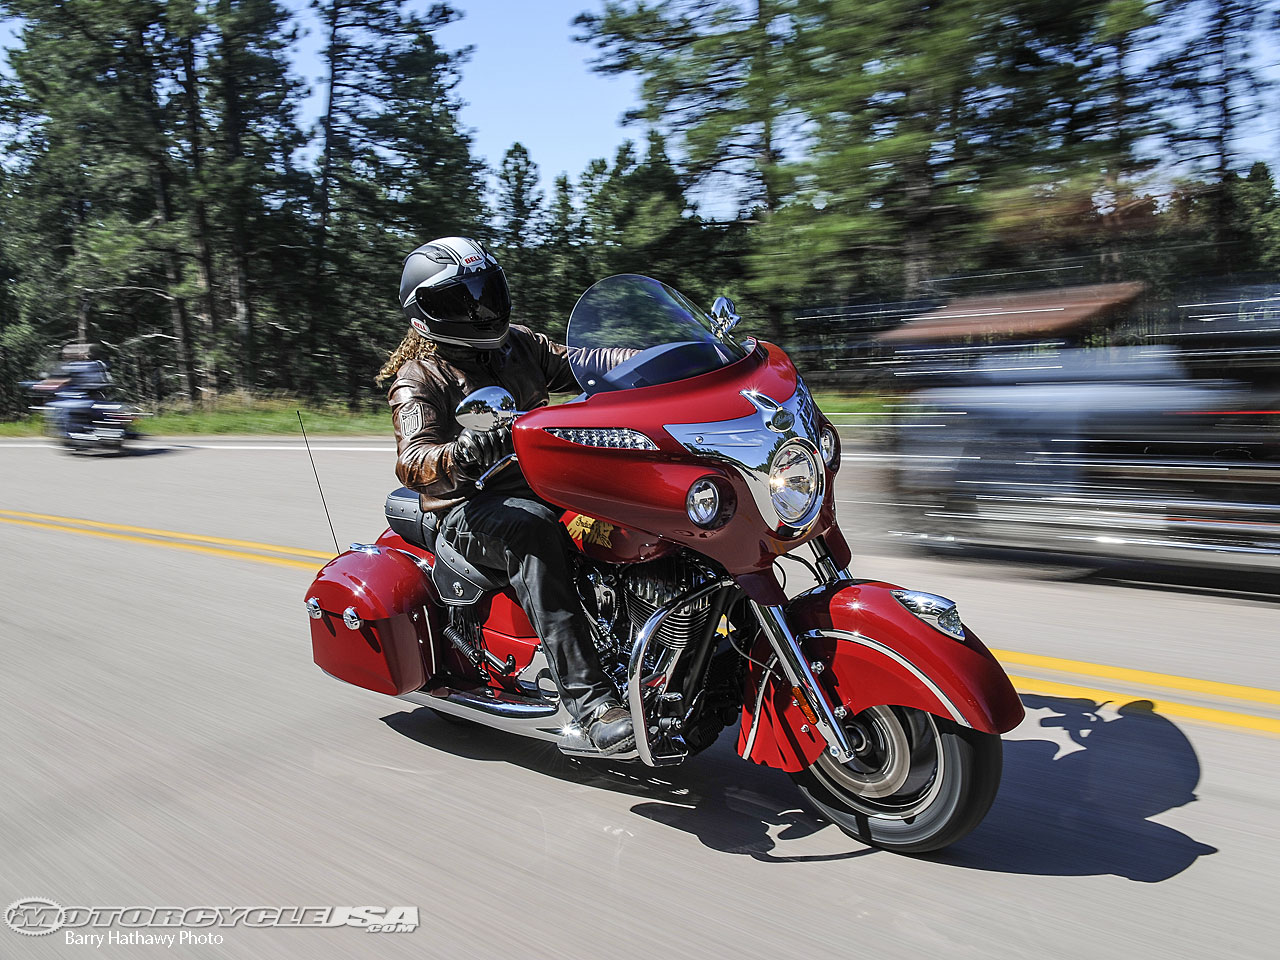 Indian Chieftain First Ride